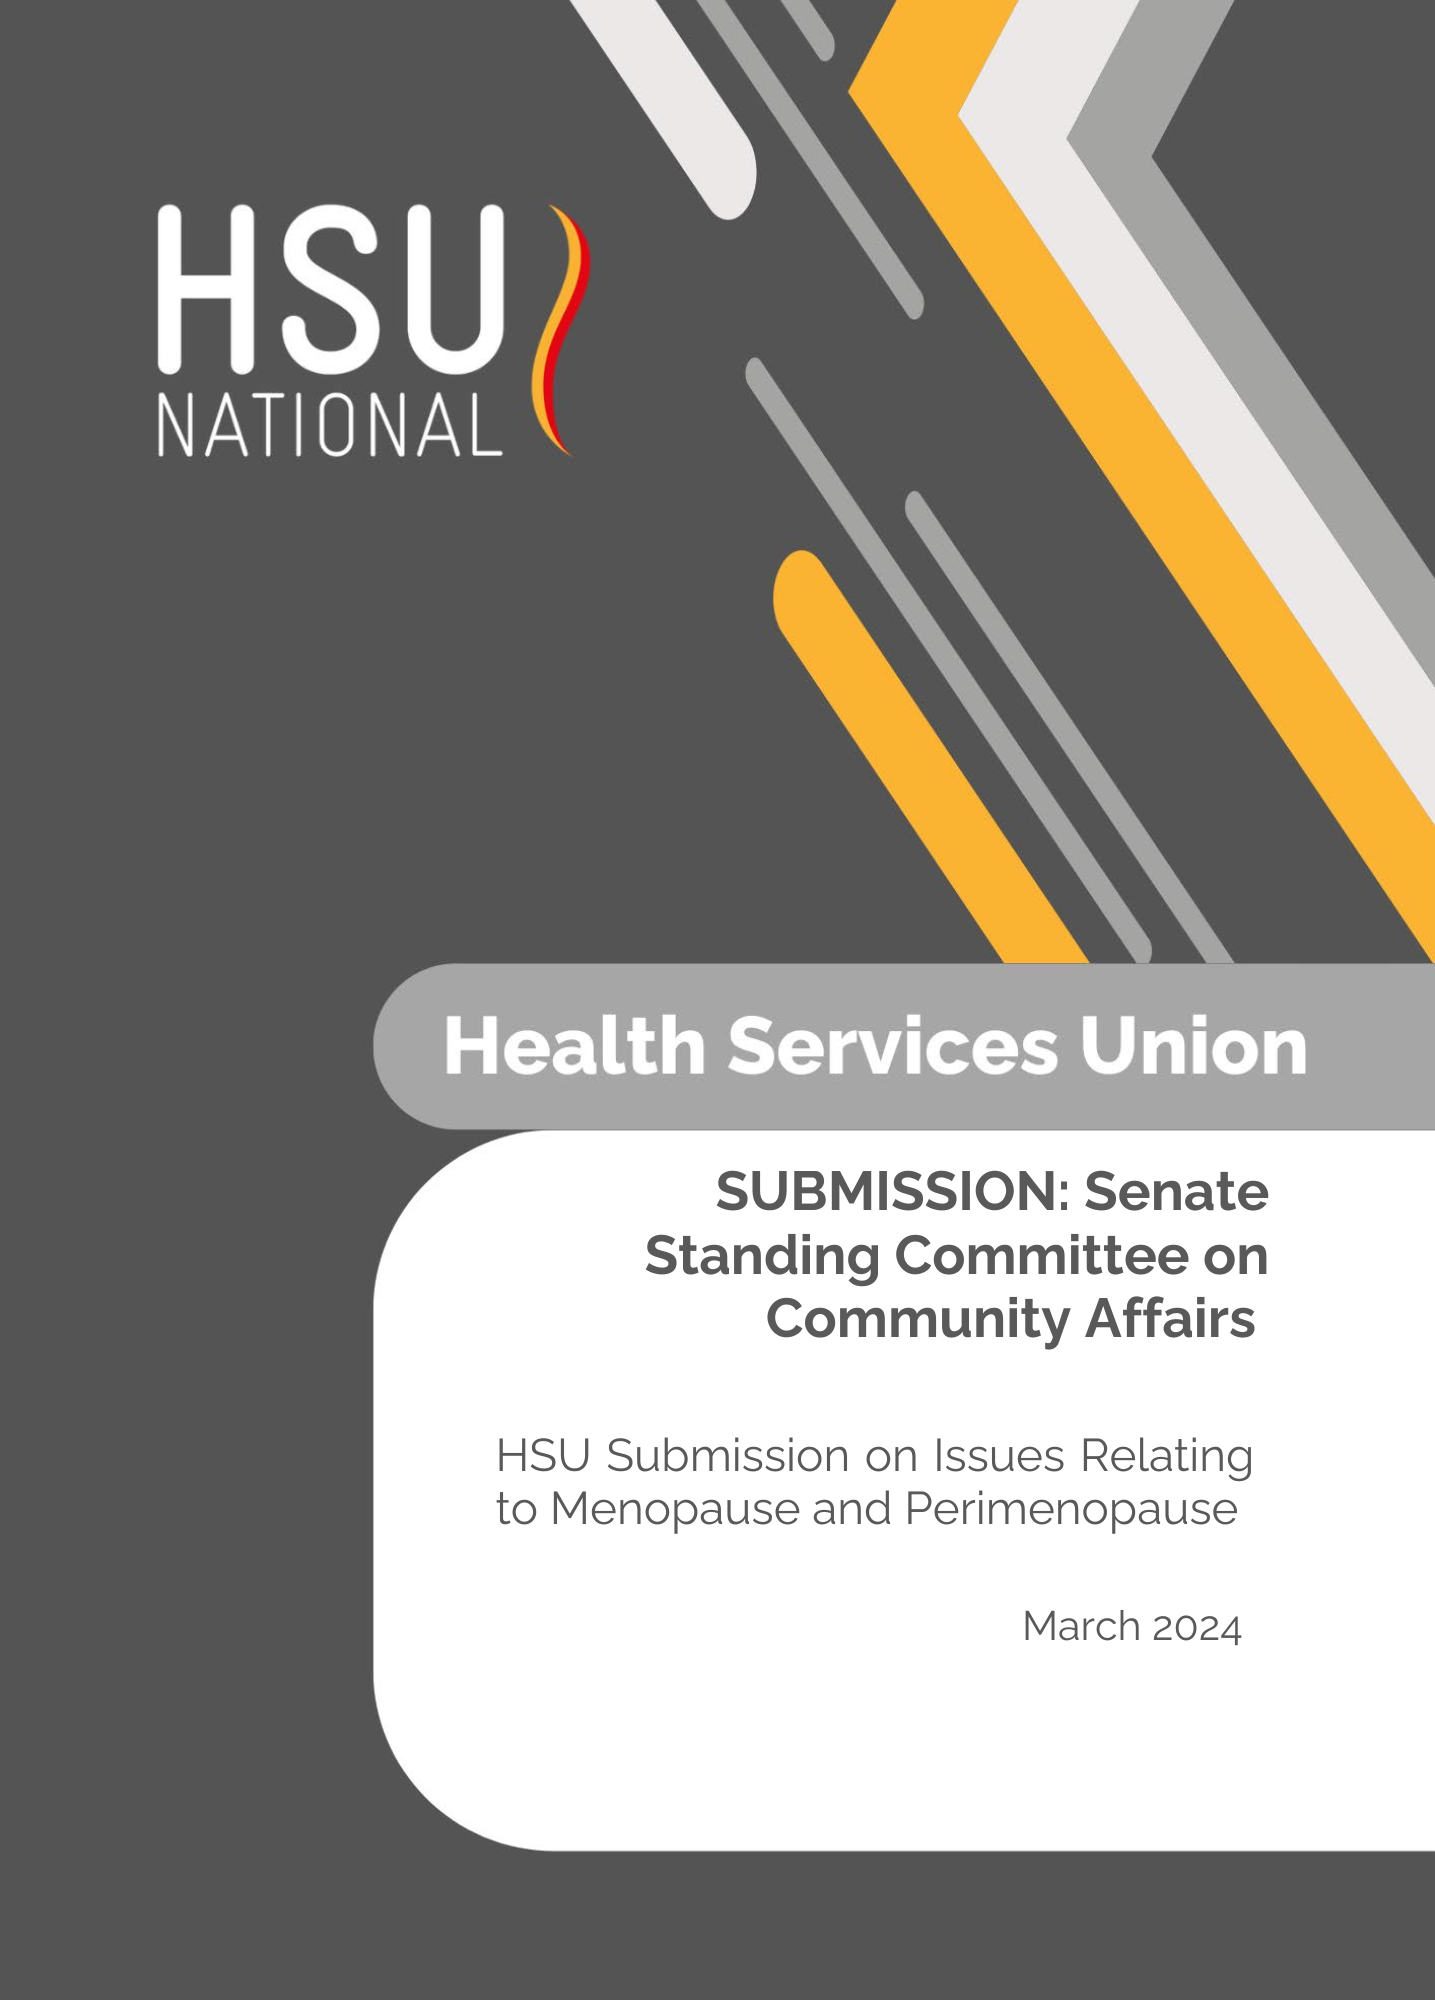 HSU Submission to the Senate on Menopausal and Perimenopausal Issues 2024.pdf